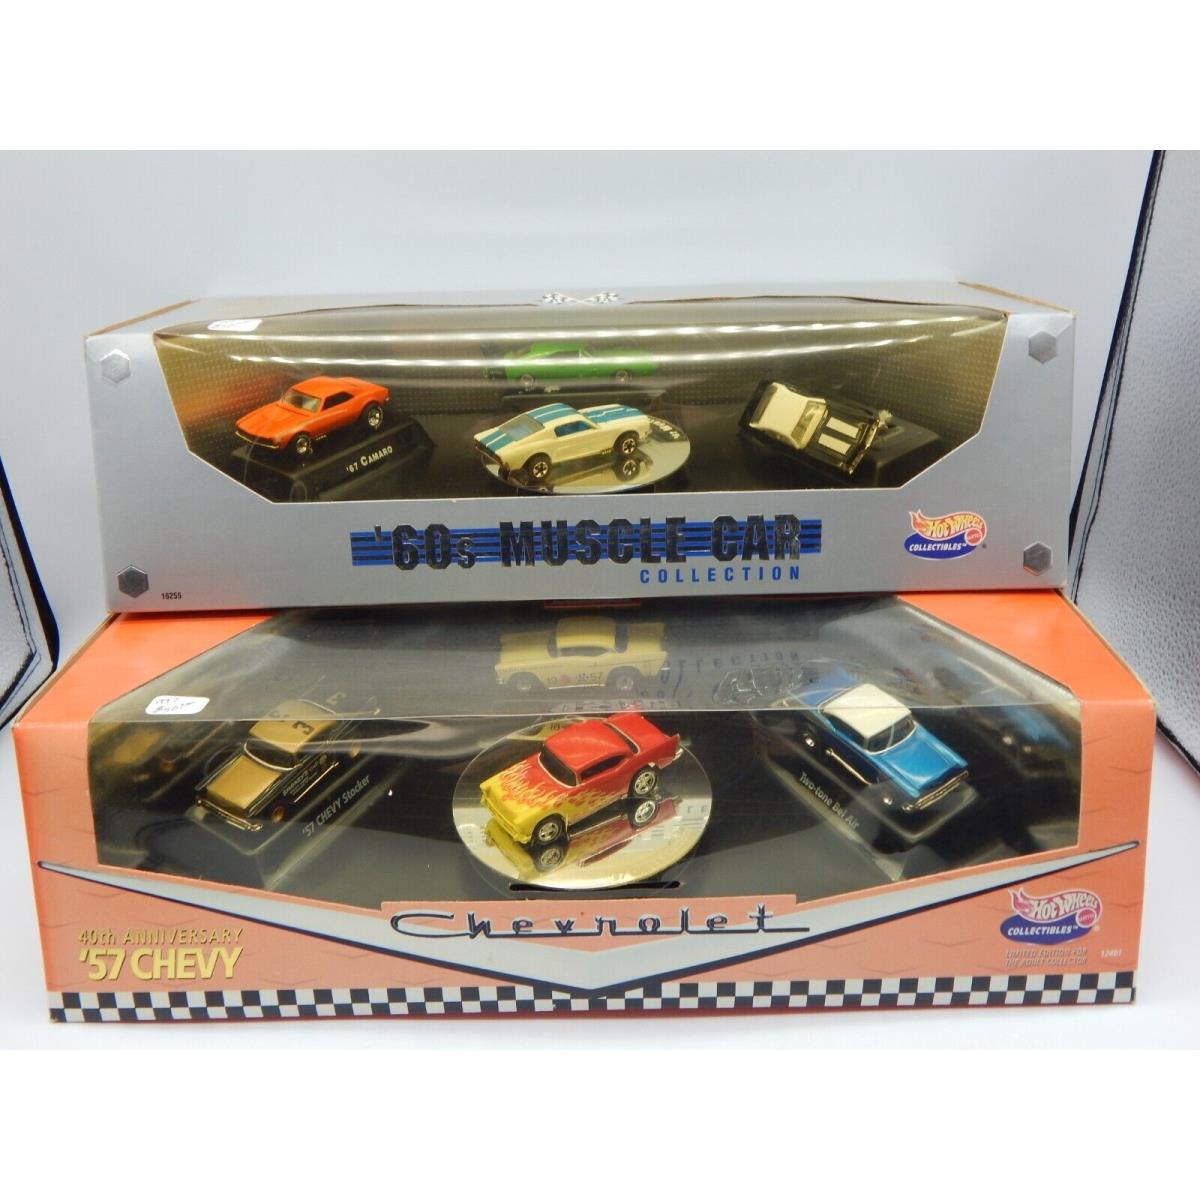 1:64 Hot Wheels 57s Chevrolet Set OF 4 and 60s Muscle Car Set OF 4 RTC110